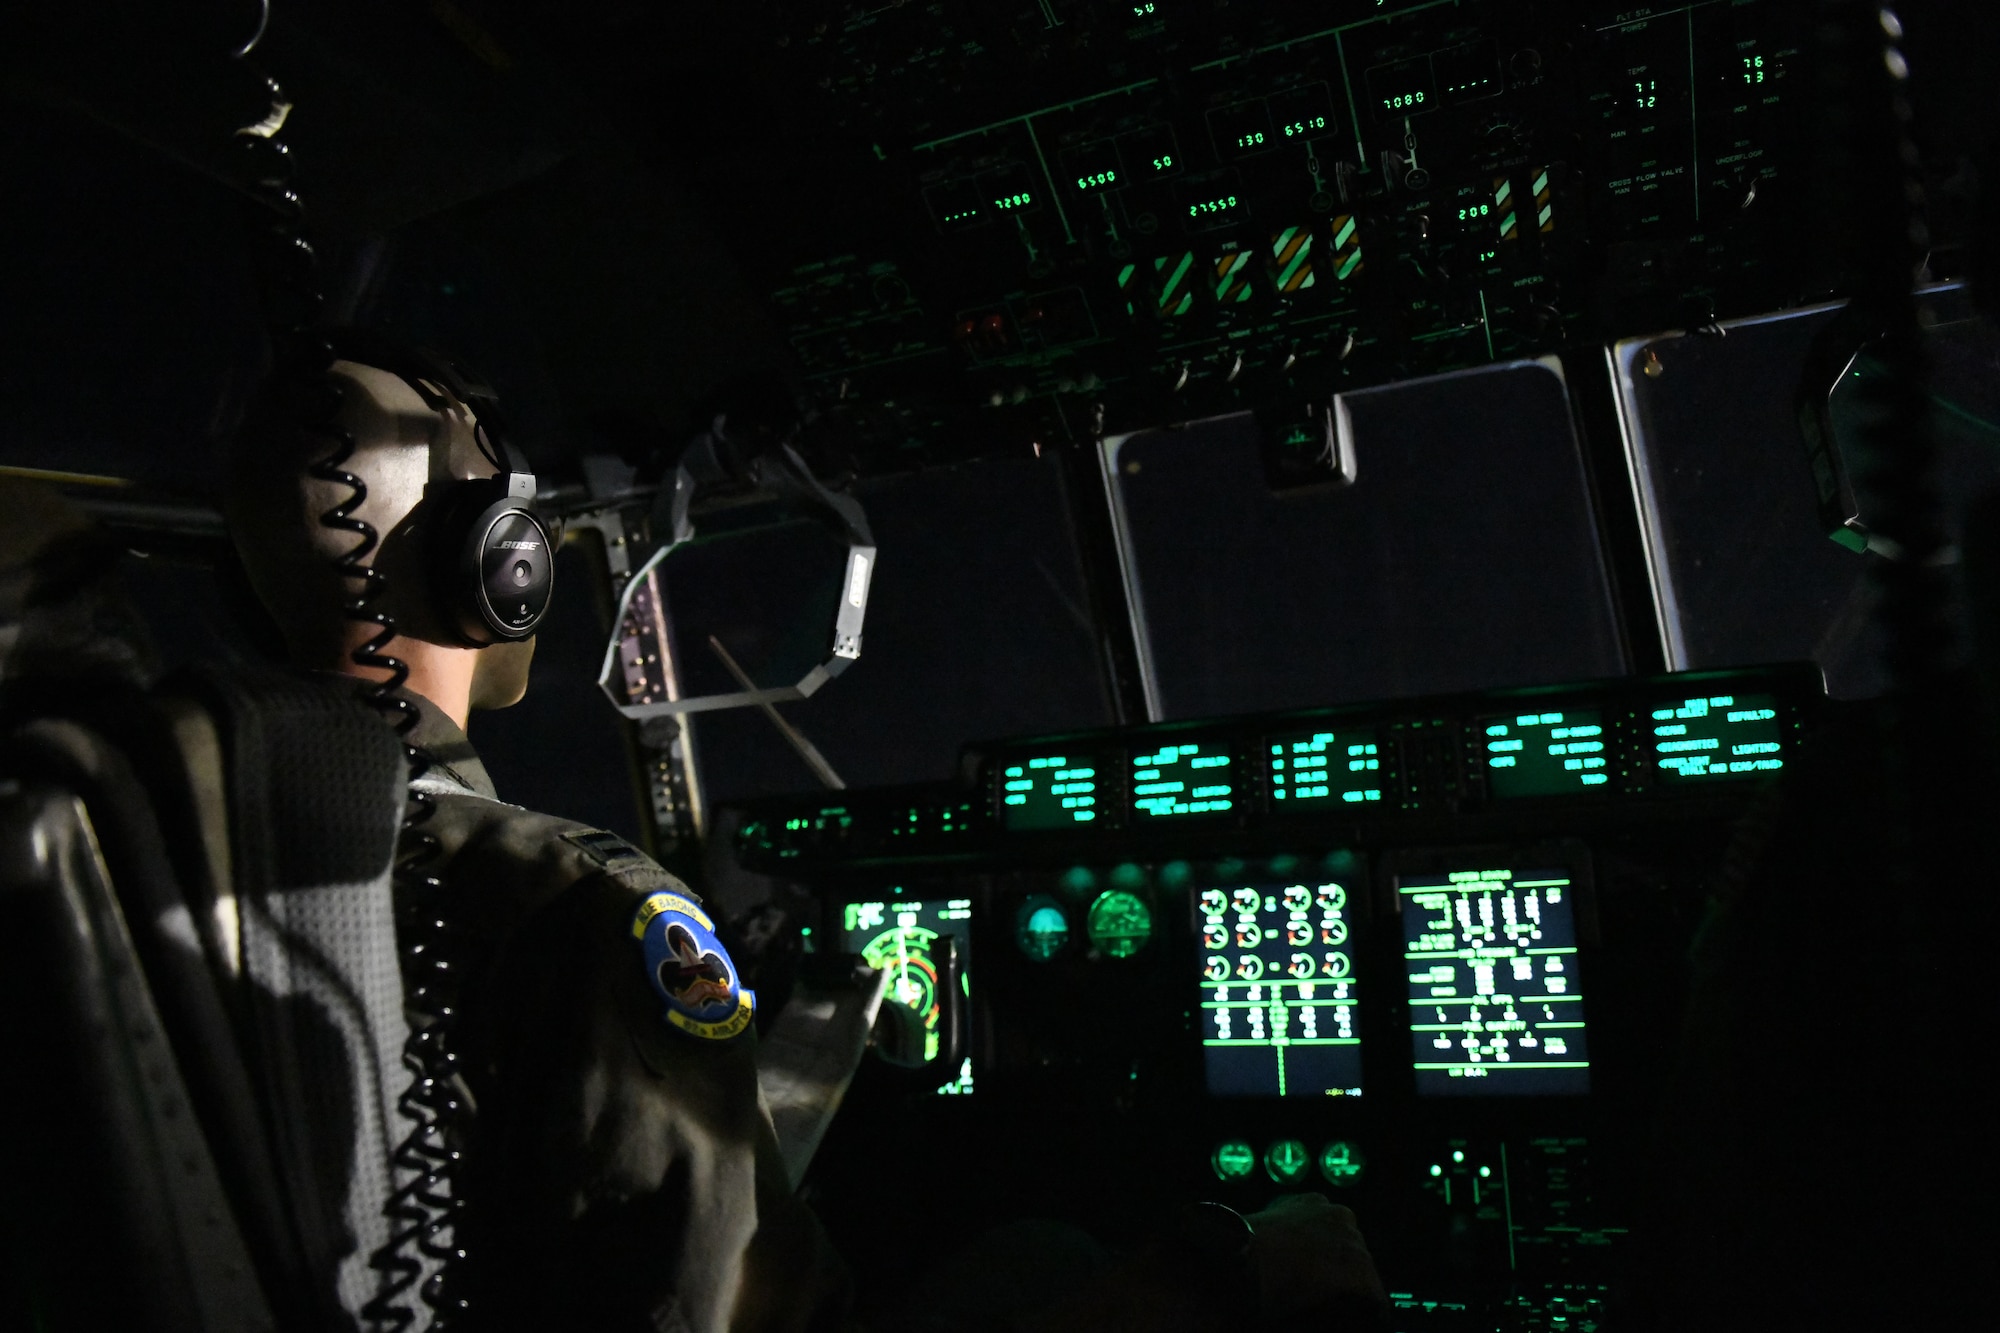 A man wears a headset while he flys a plane in the darkness of the night